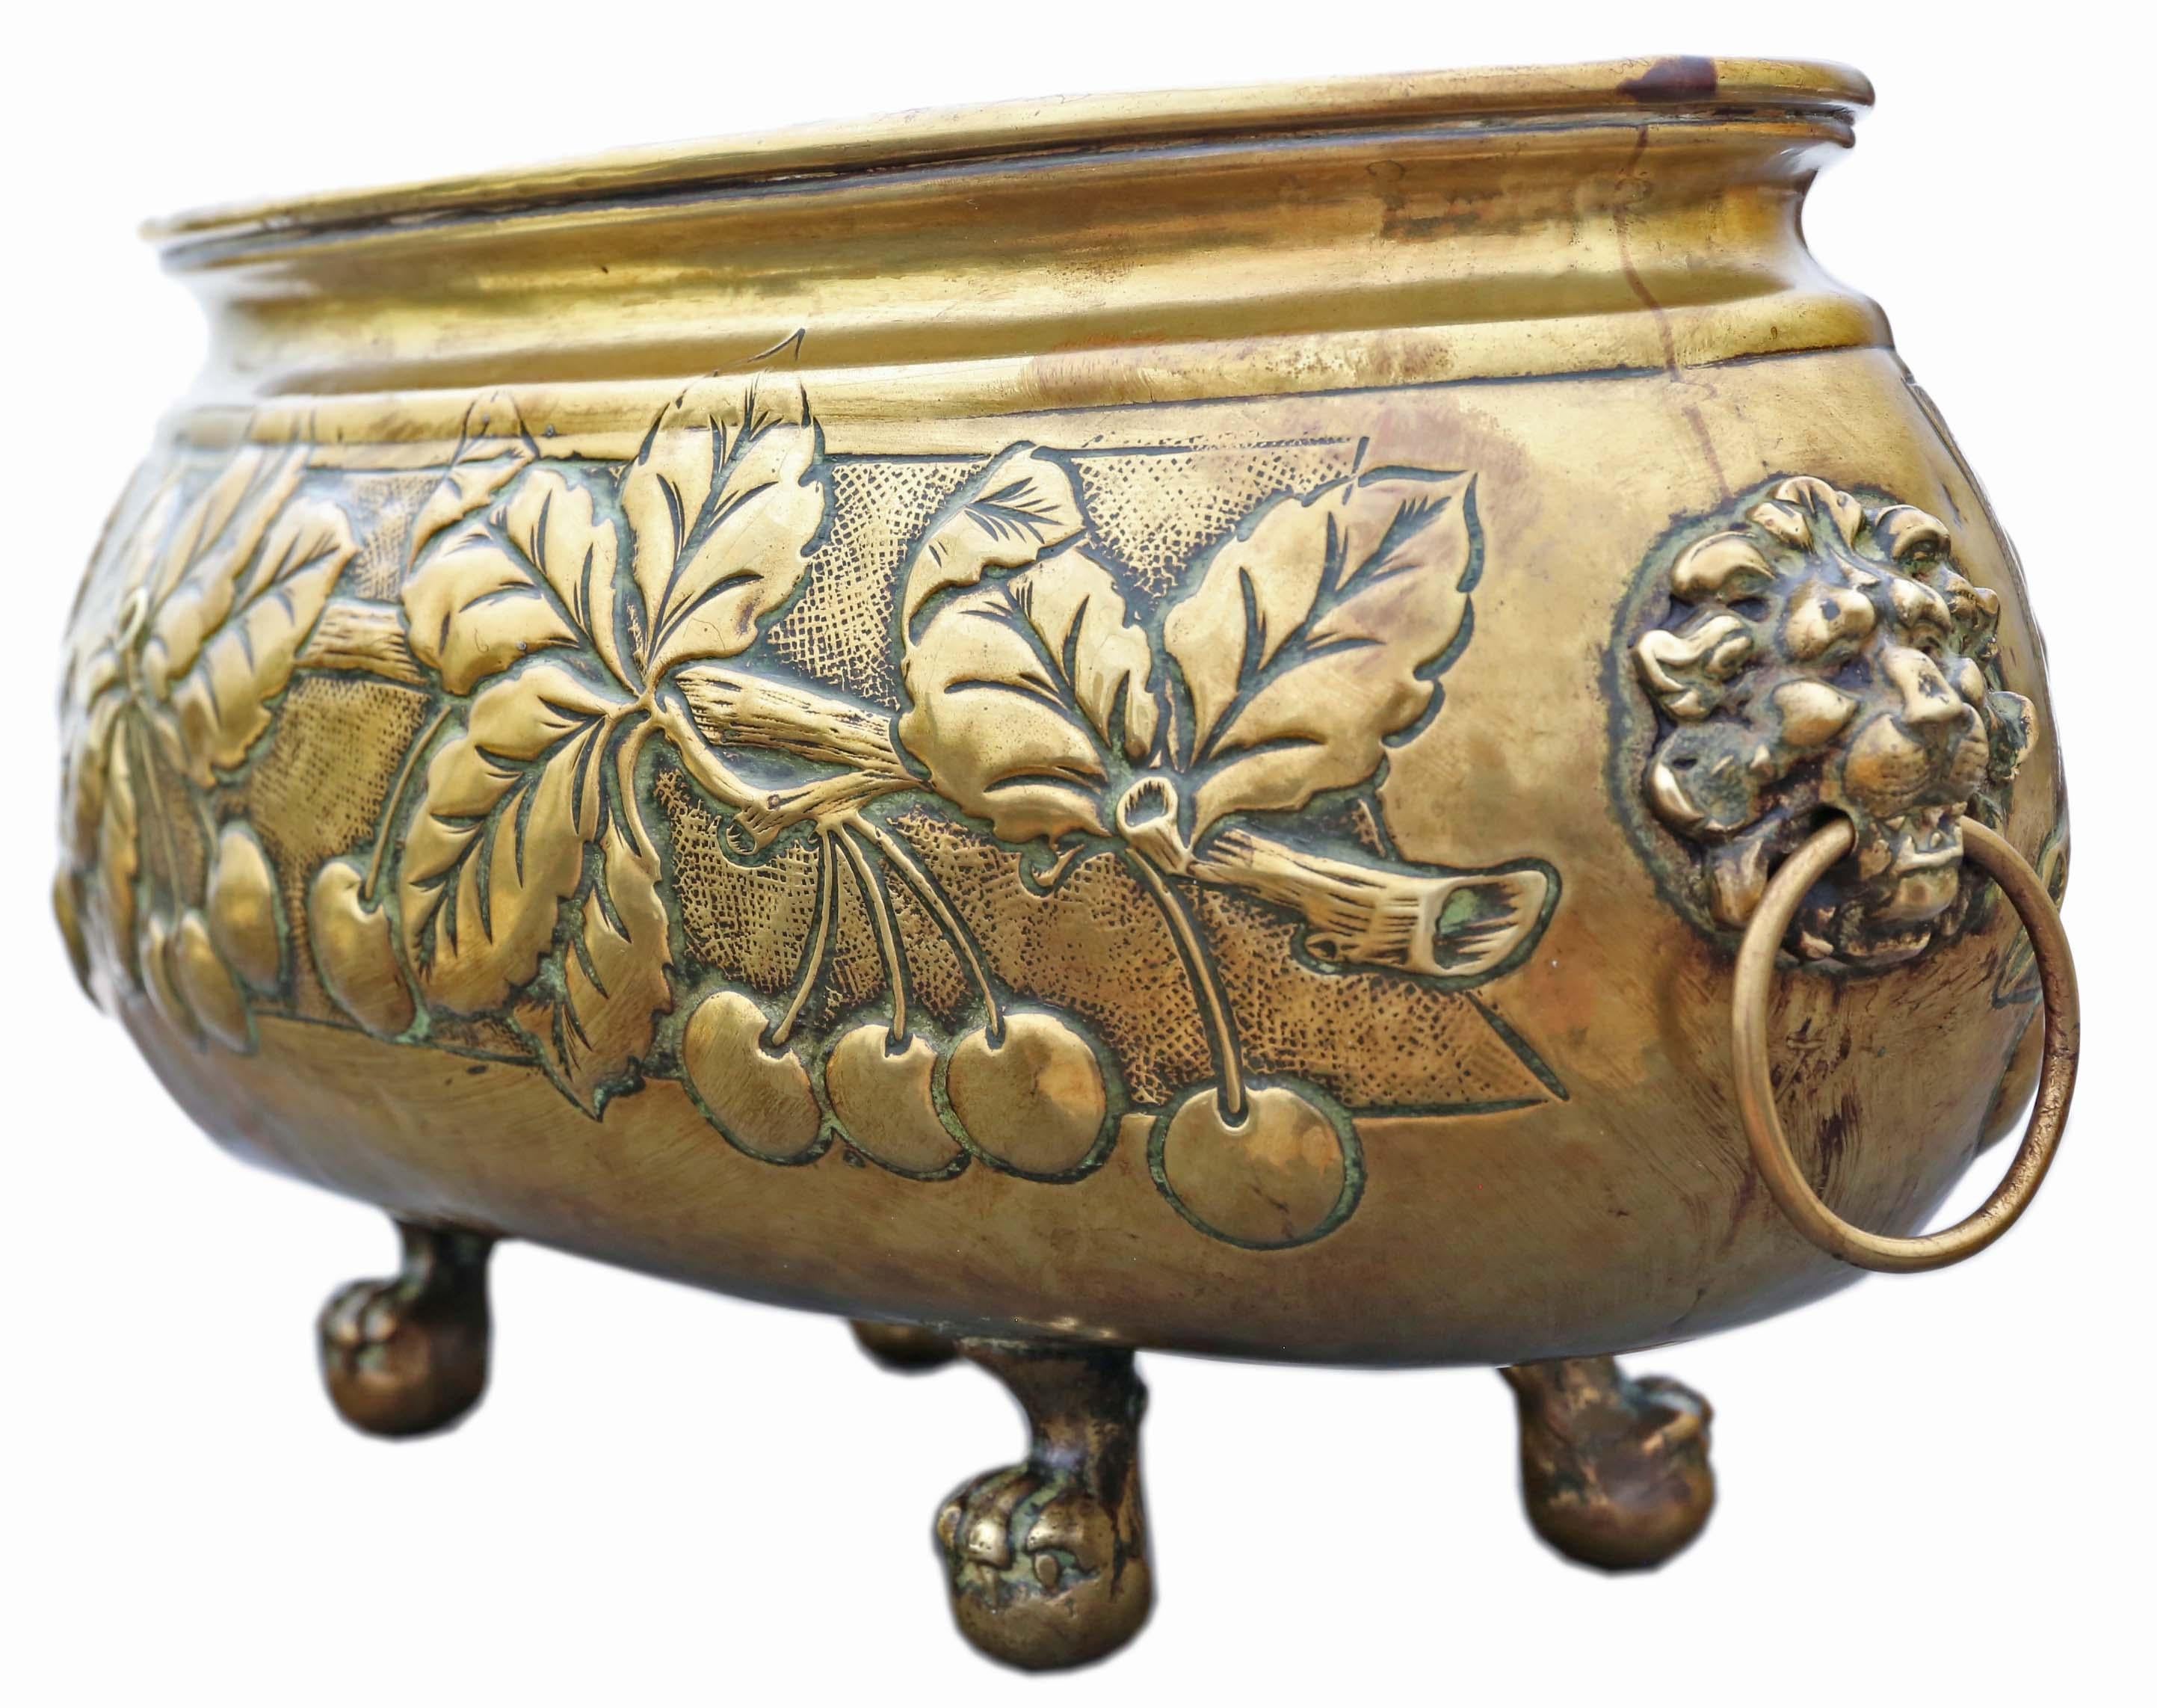 Antique Dutch Large Quality Brass Bowl Planter Jardinière 18th Century C1790 In Good Condition For Sale In Wisbech, Cambridgeshire